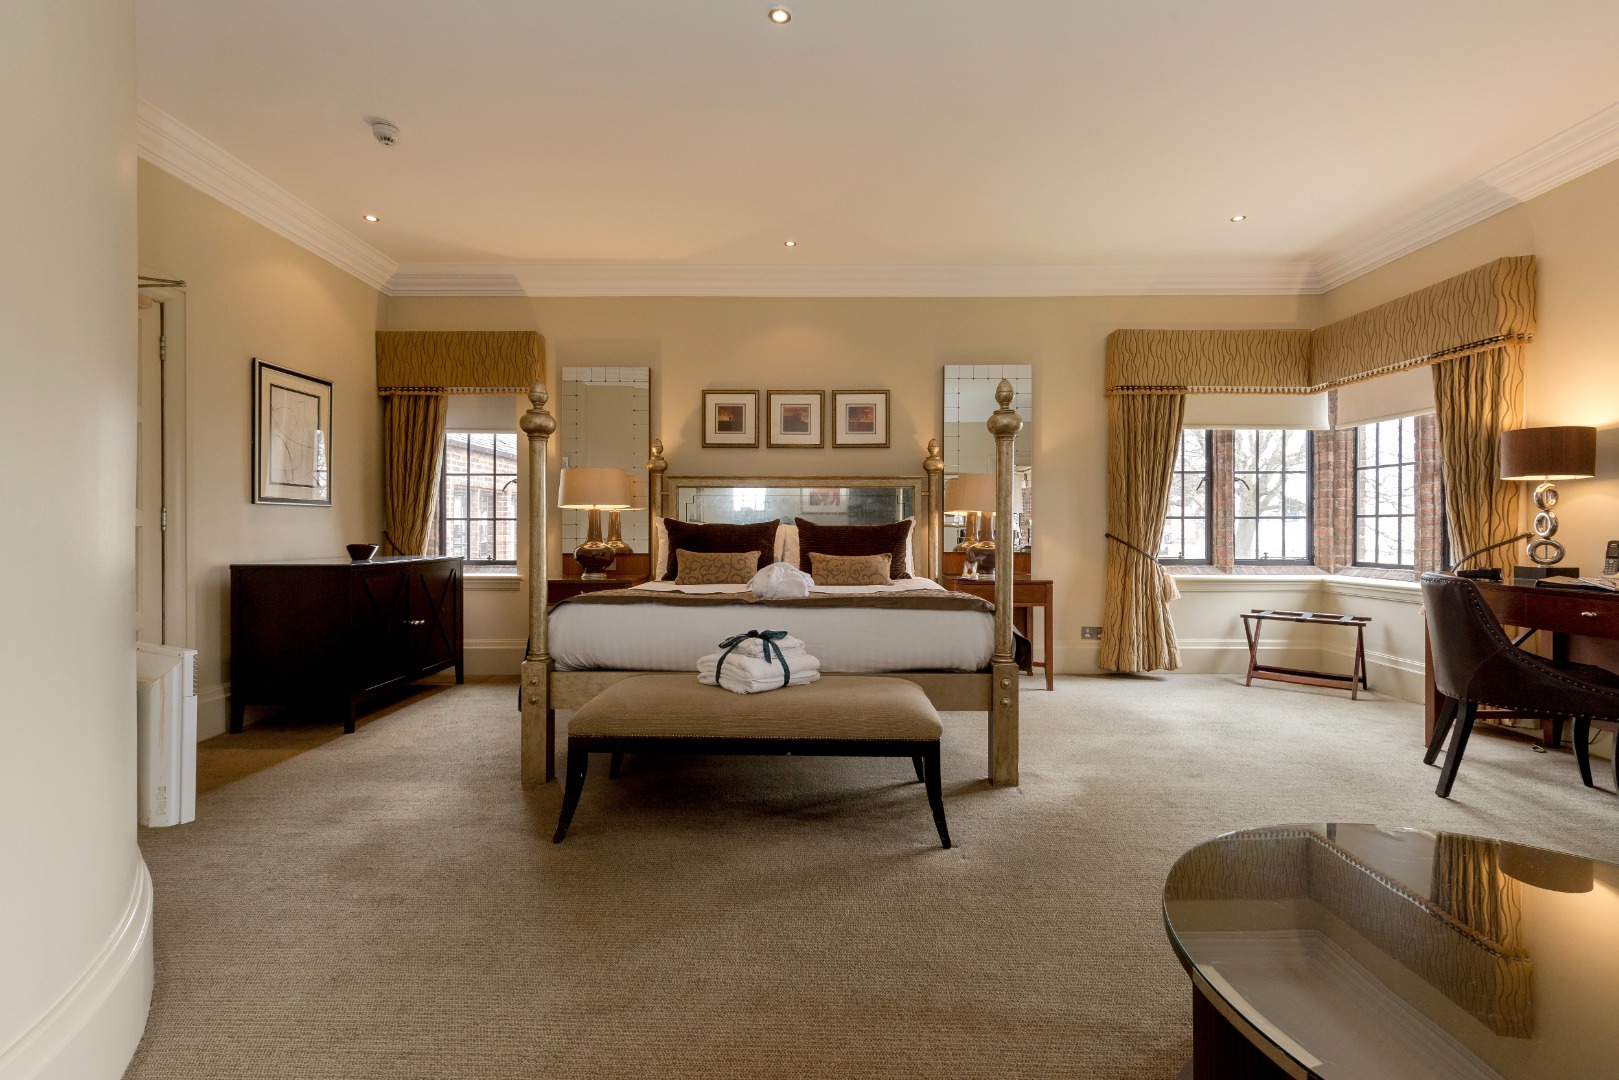 Experience a world of luxury in our Main House Rooms